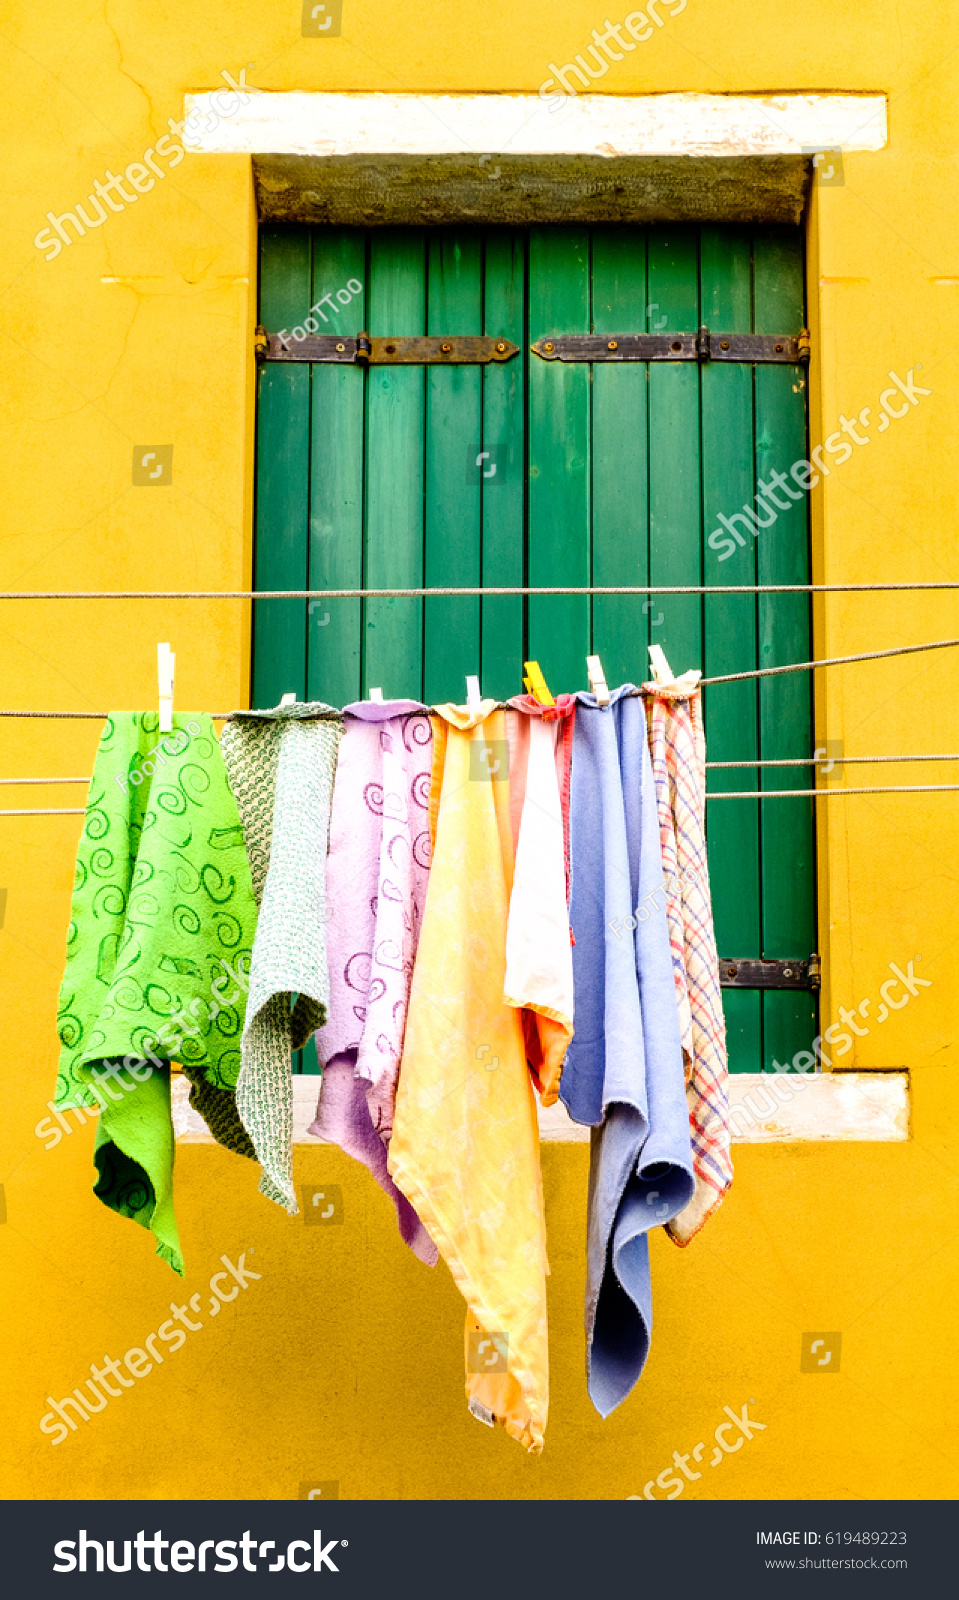 drying clothes in italy - photo #619489223